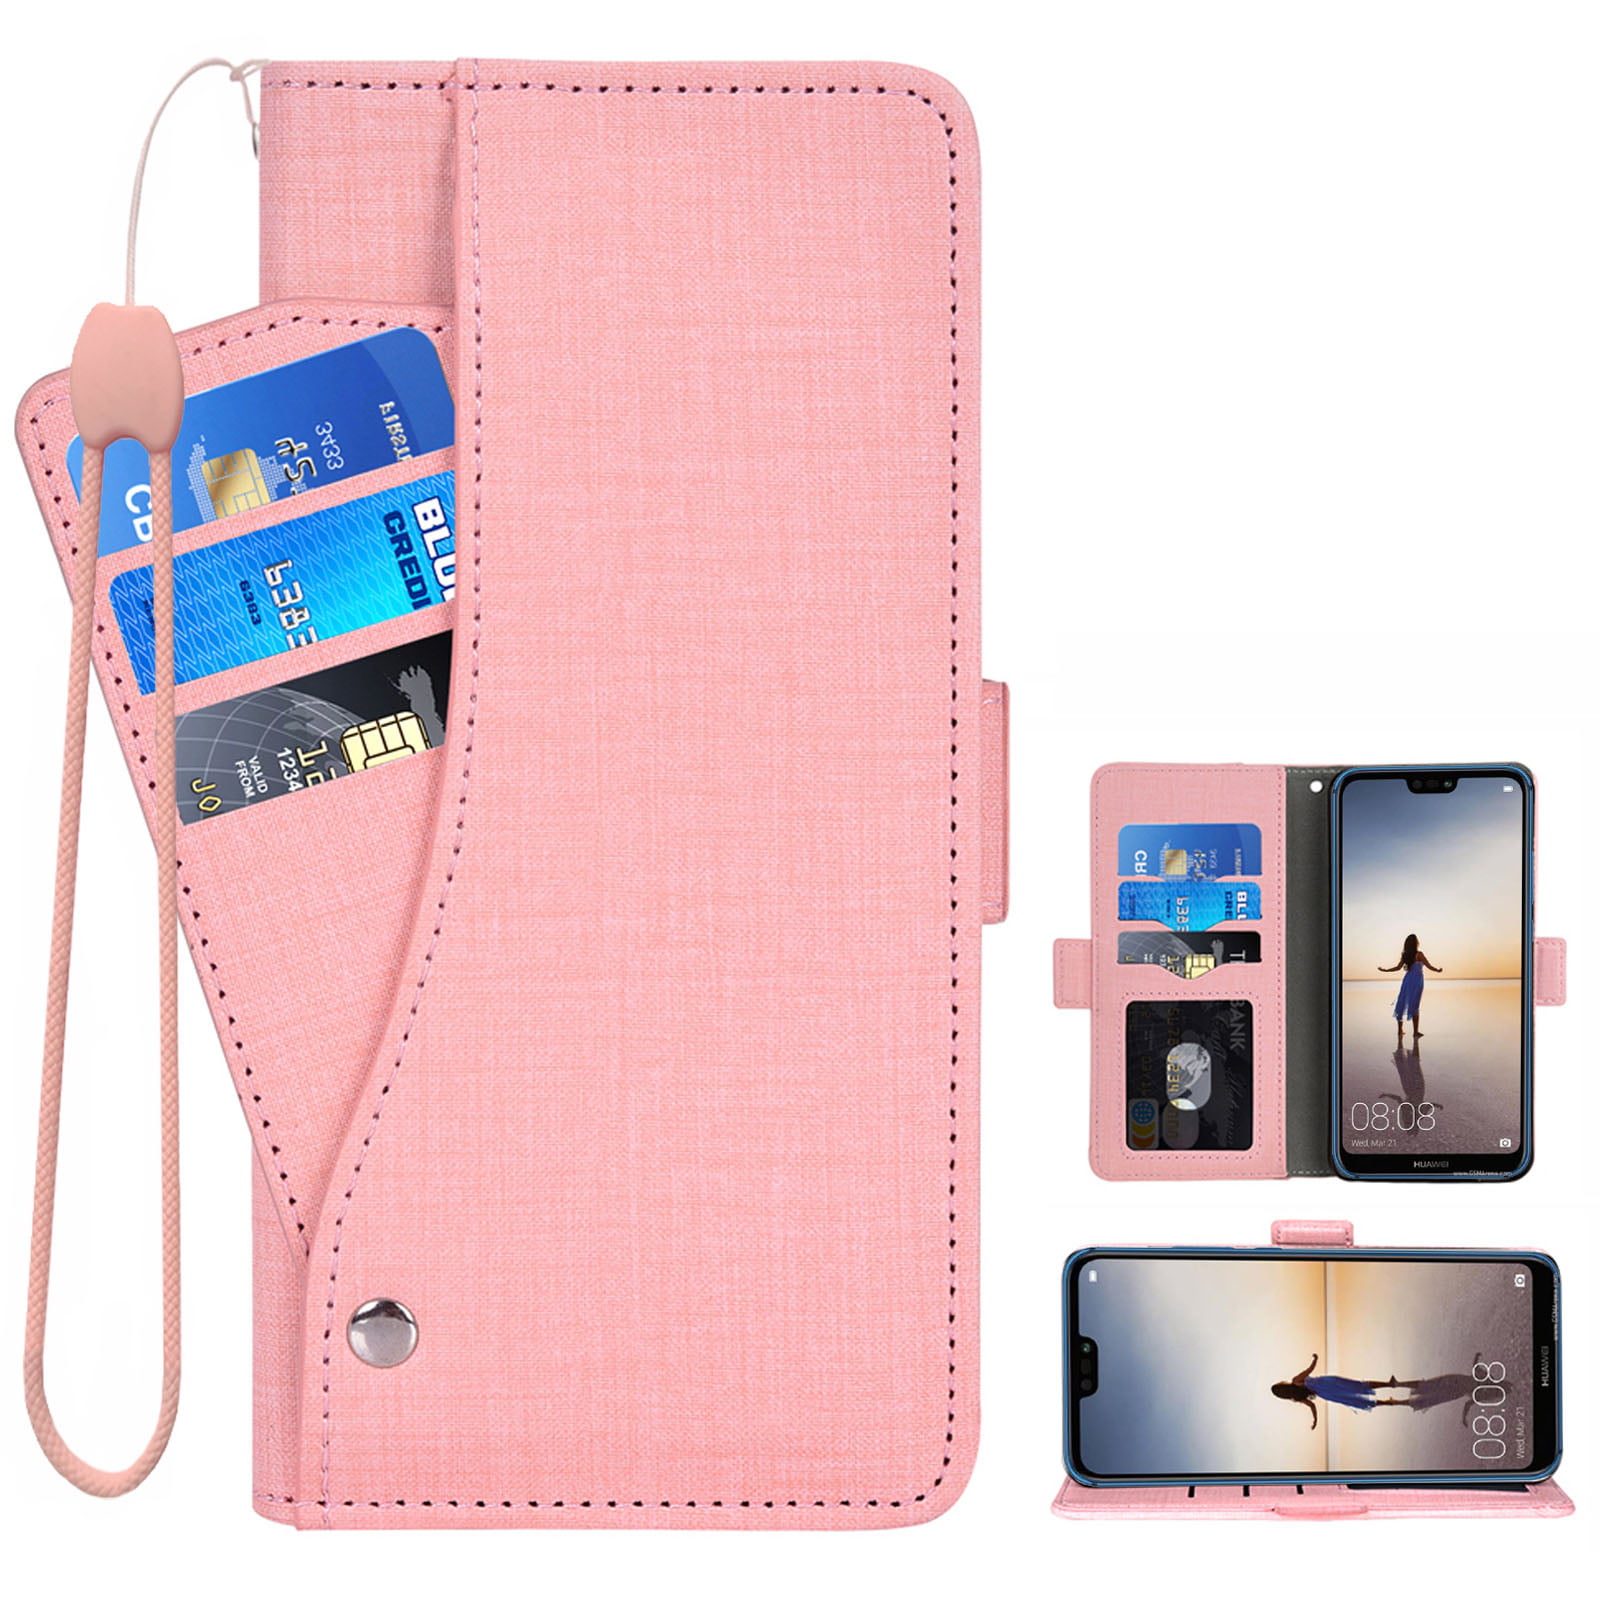 Huawei P20 LITE Flip Case Cover for Huawei P20 LITE Leather Kickstand Cell Phone Cover Card Holders Luxury Business with Free Waterproof-Bag Fashion